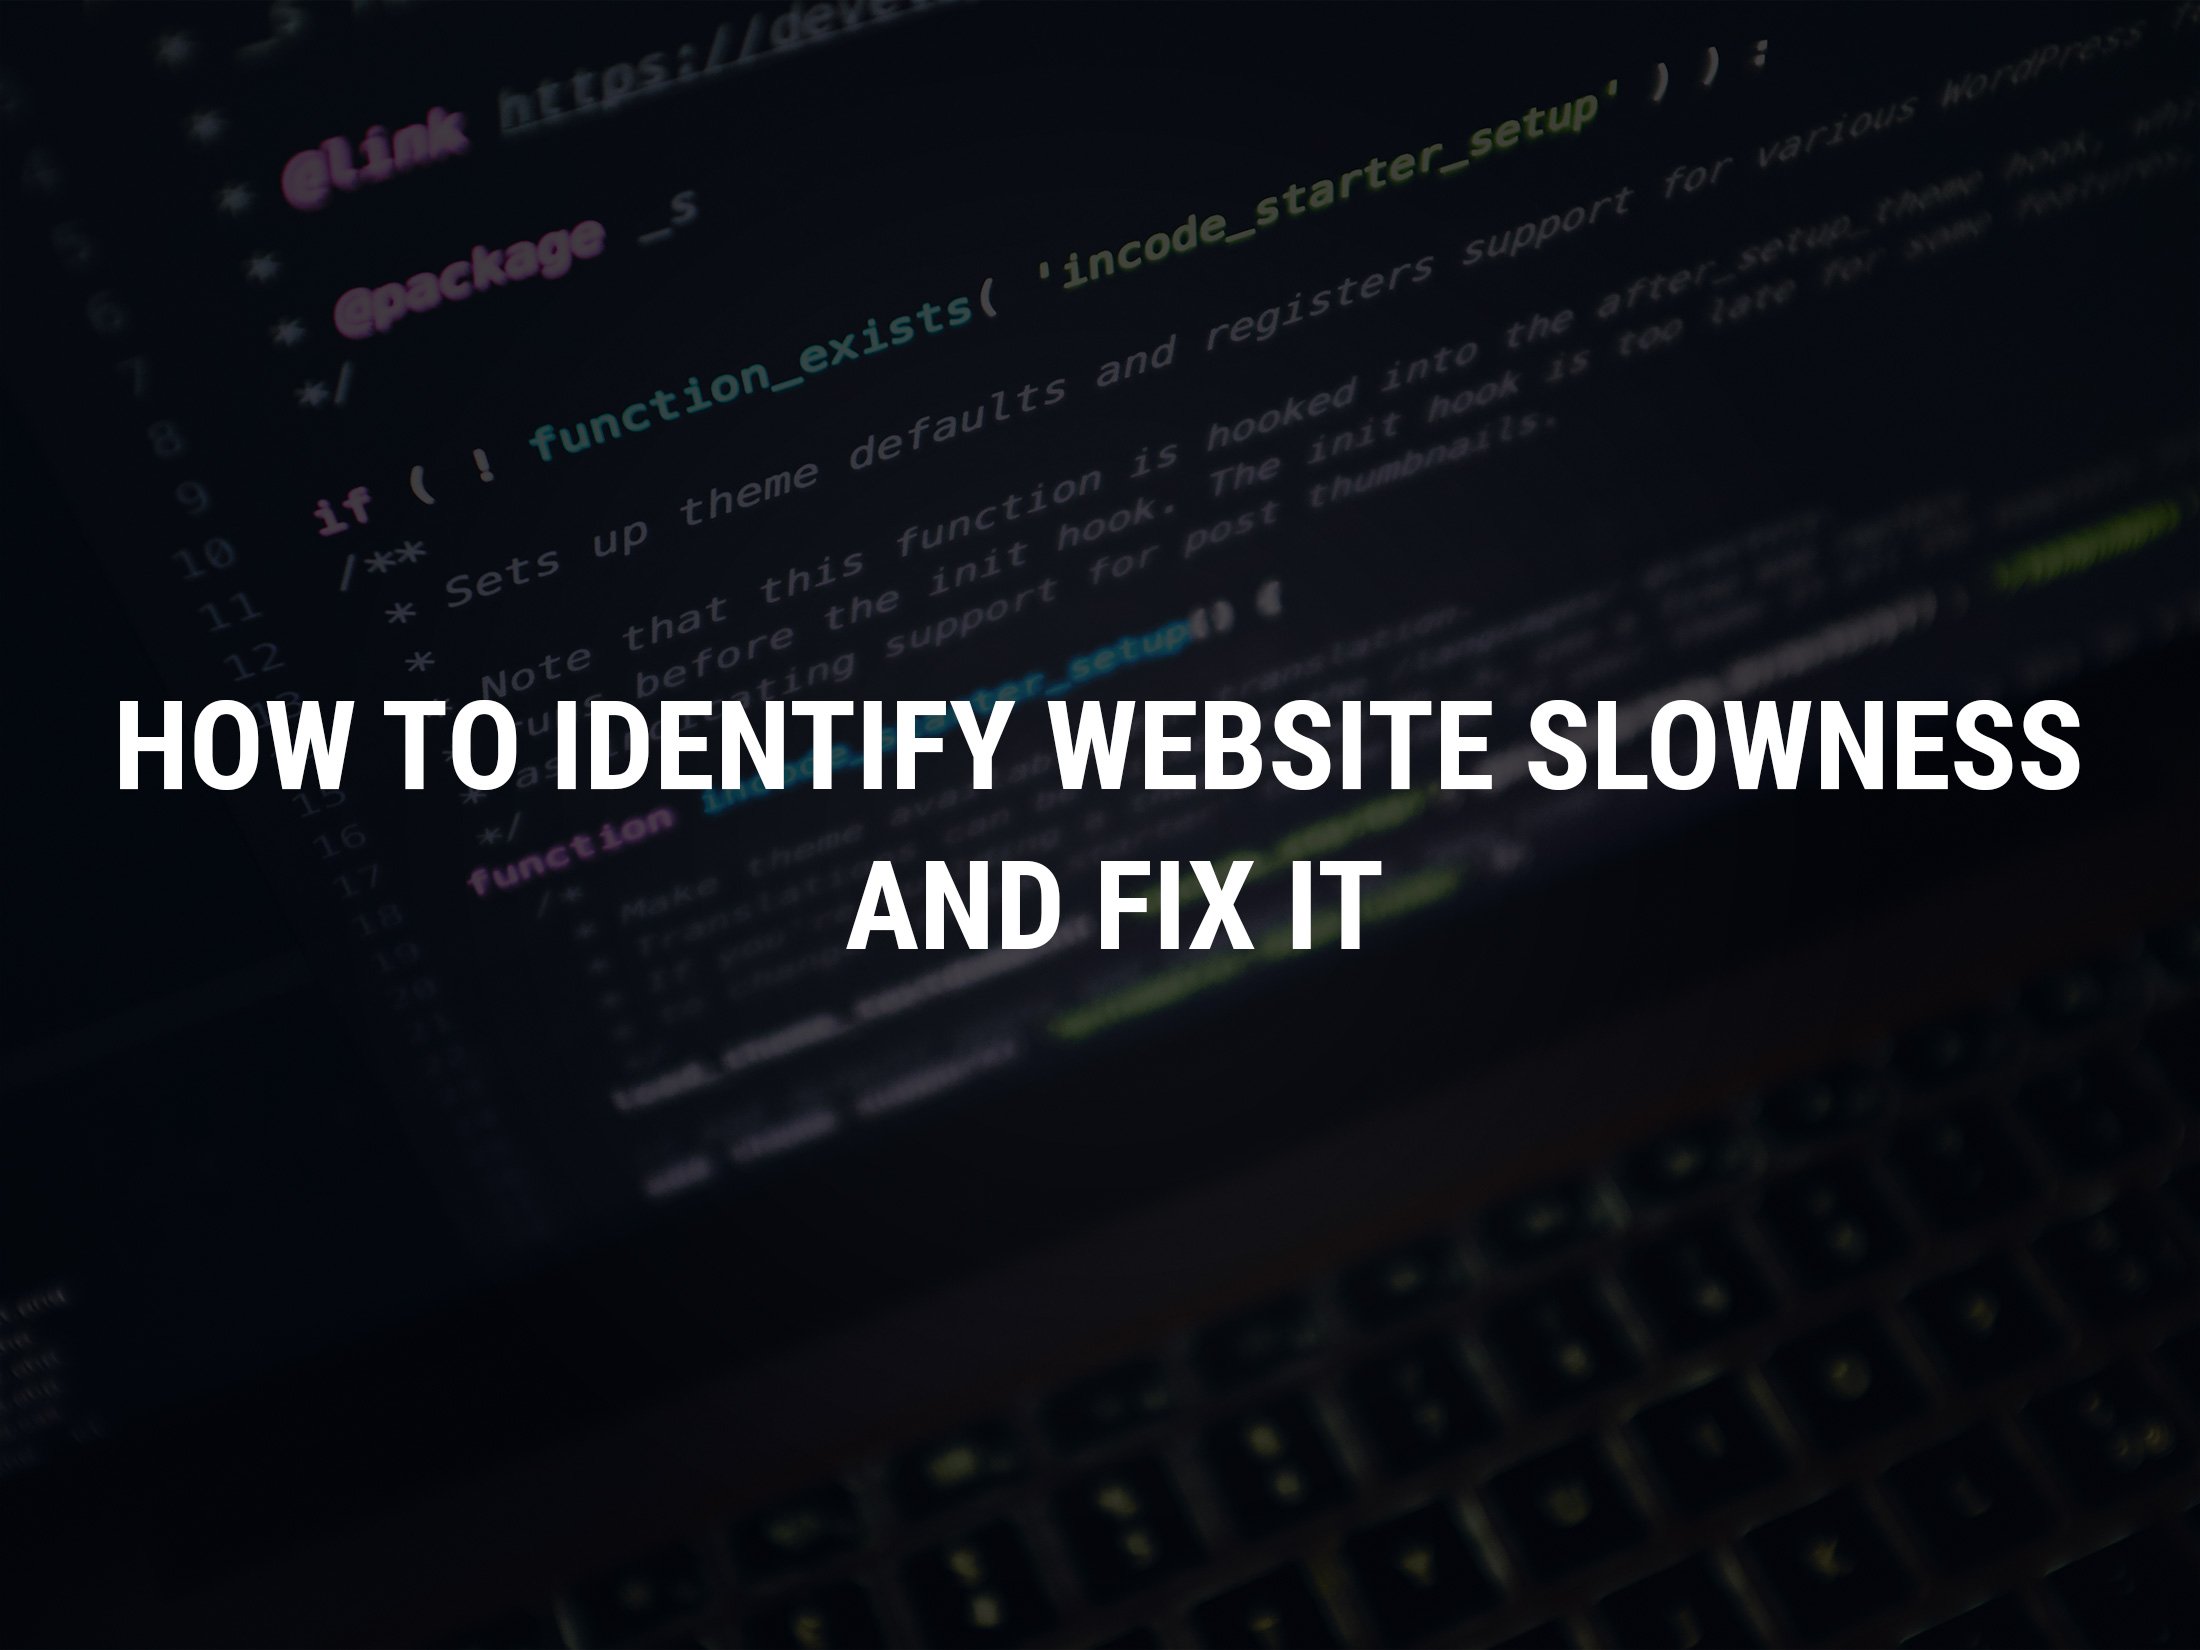 How to identify website slowness and fix it